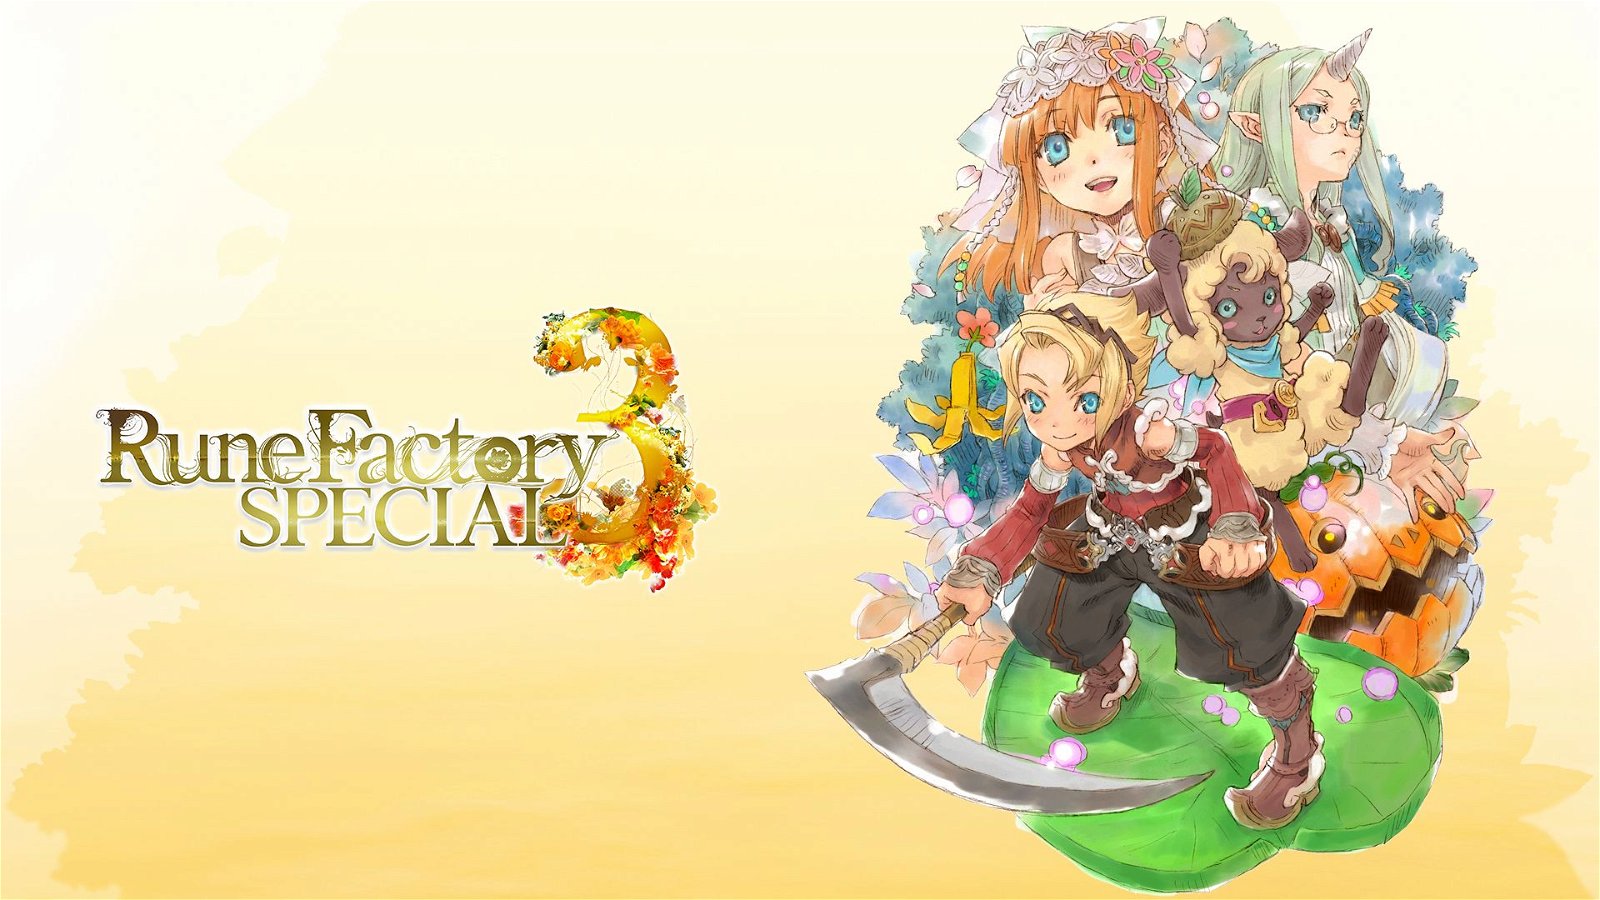 Image of Rune Factory 3 Special